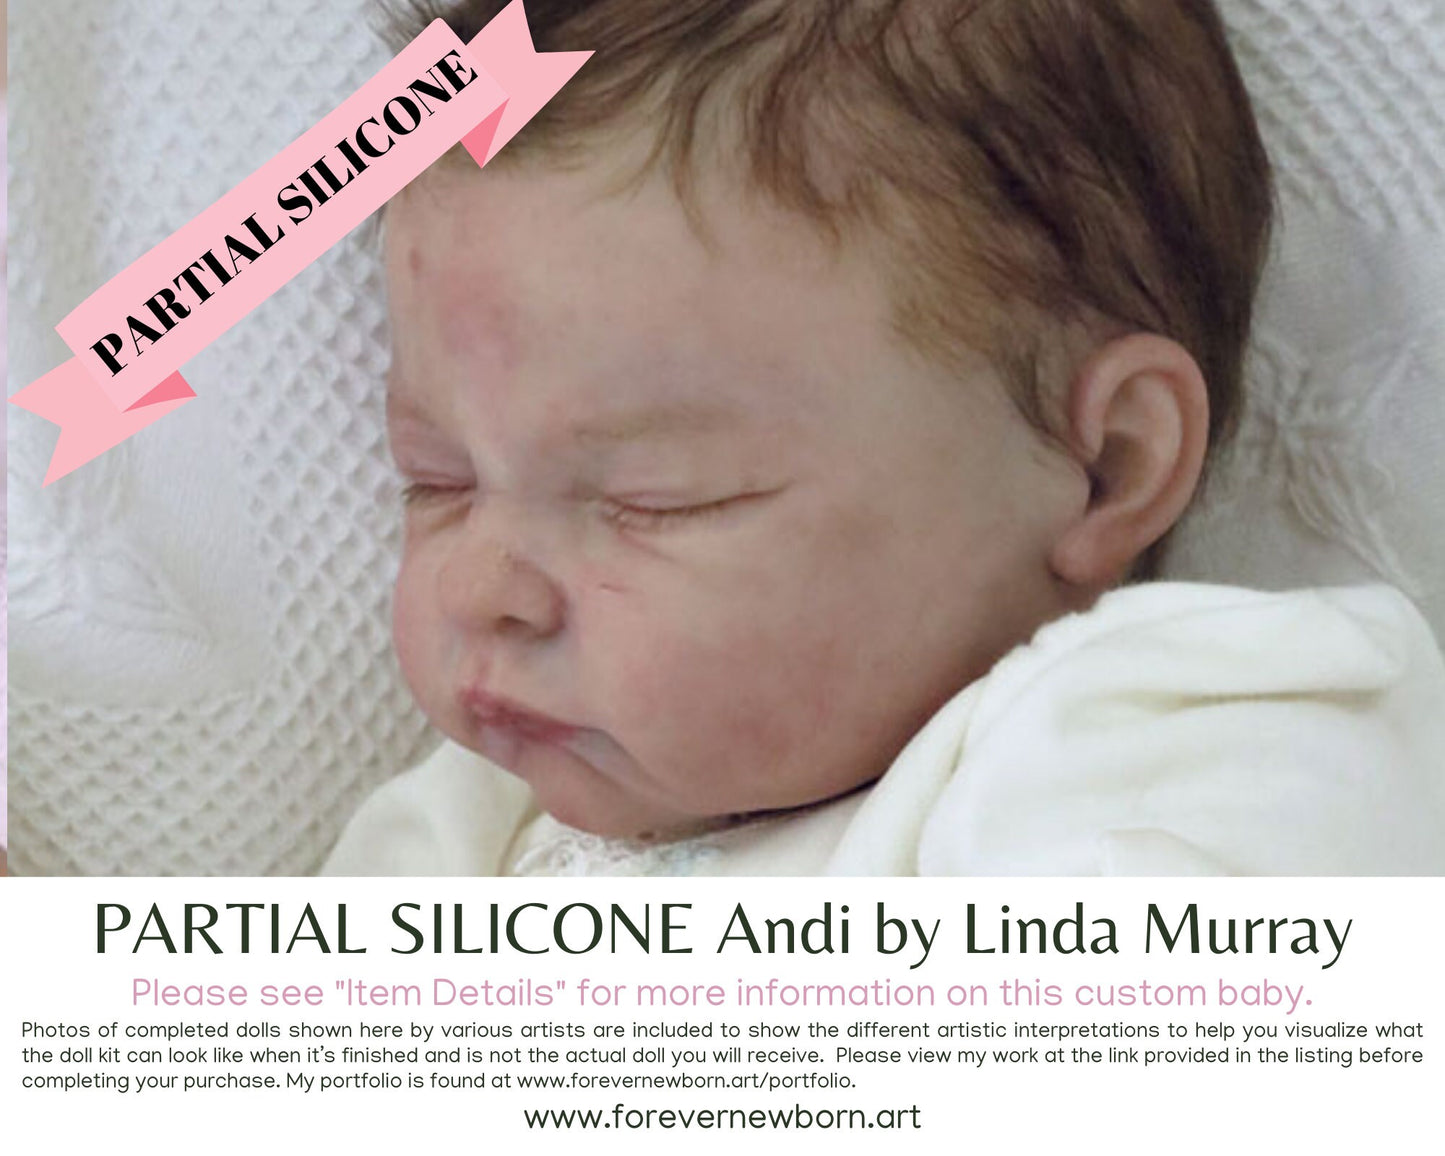 SiLiCoNe BaBy Andi by Linda Murray (20"+ 3/4 Limbs) with cloth body. Extended Processing Time May Be Required. ASK FIRST!